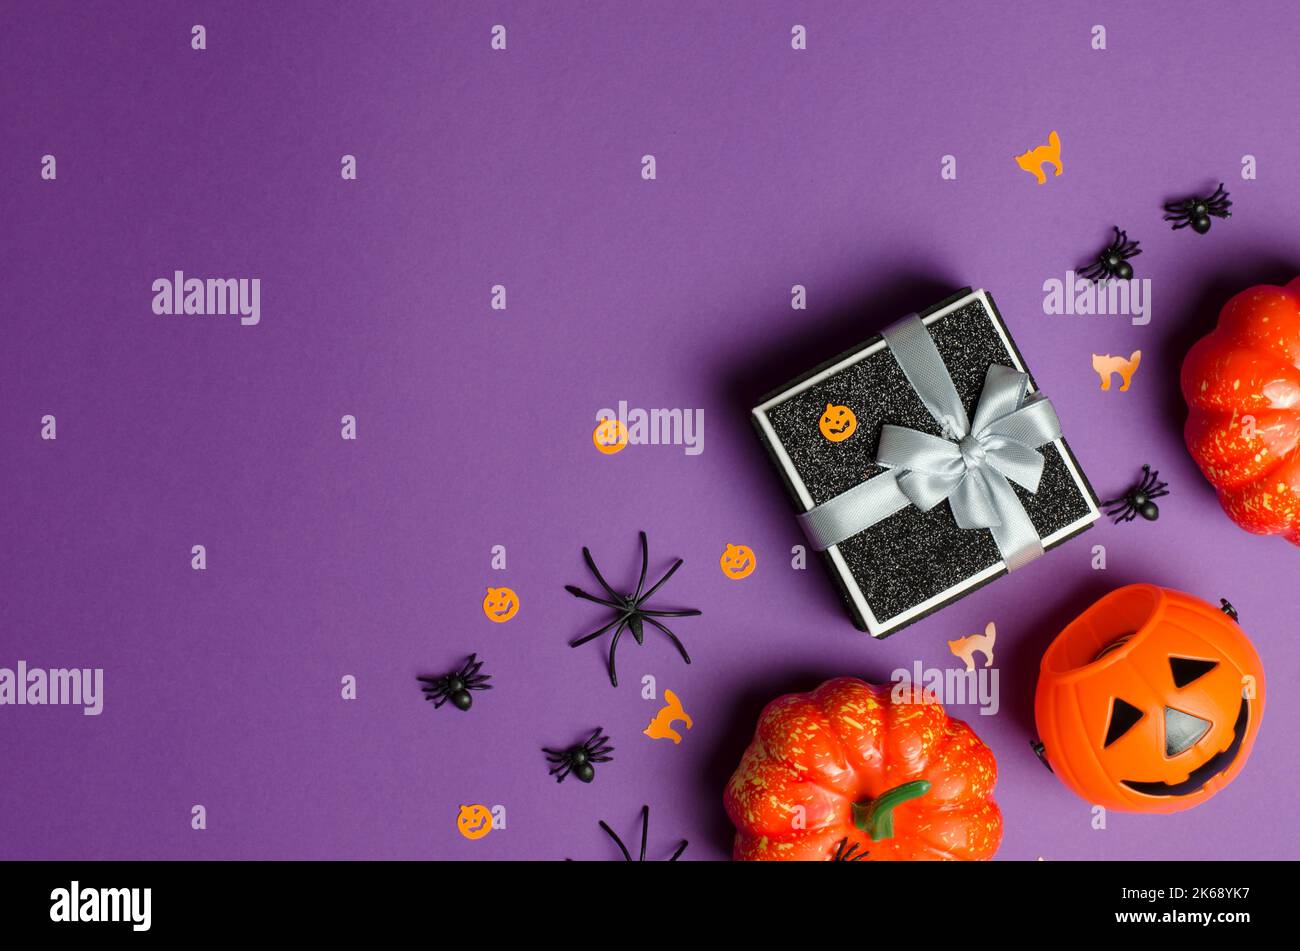 Halloween gifts and sale. Black gift box and traditional halloween decorations on purple background, copy space. Stock Photo